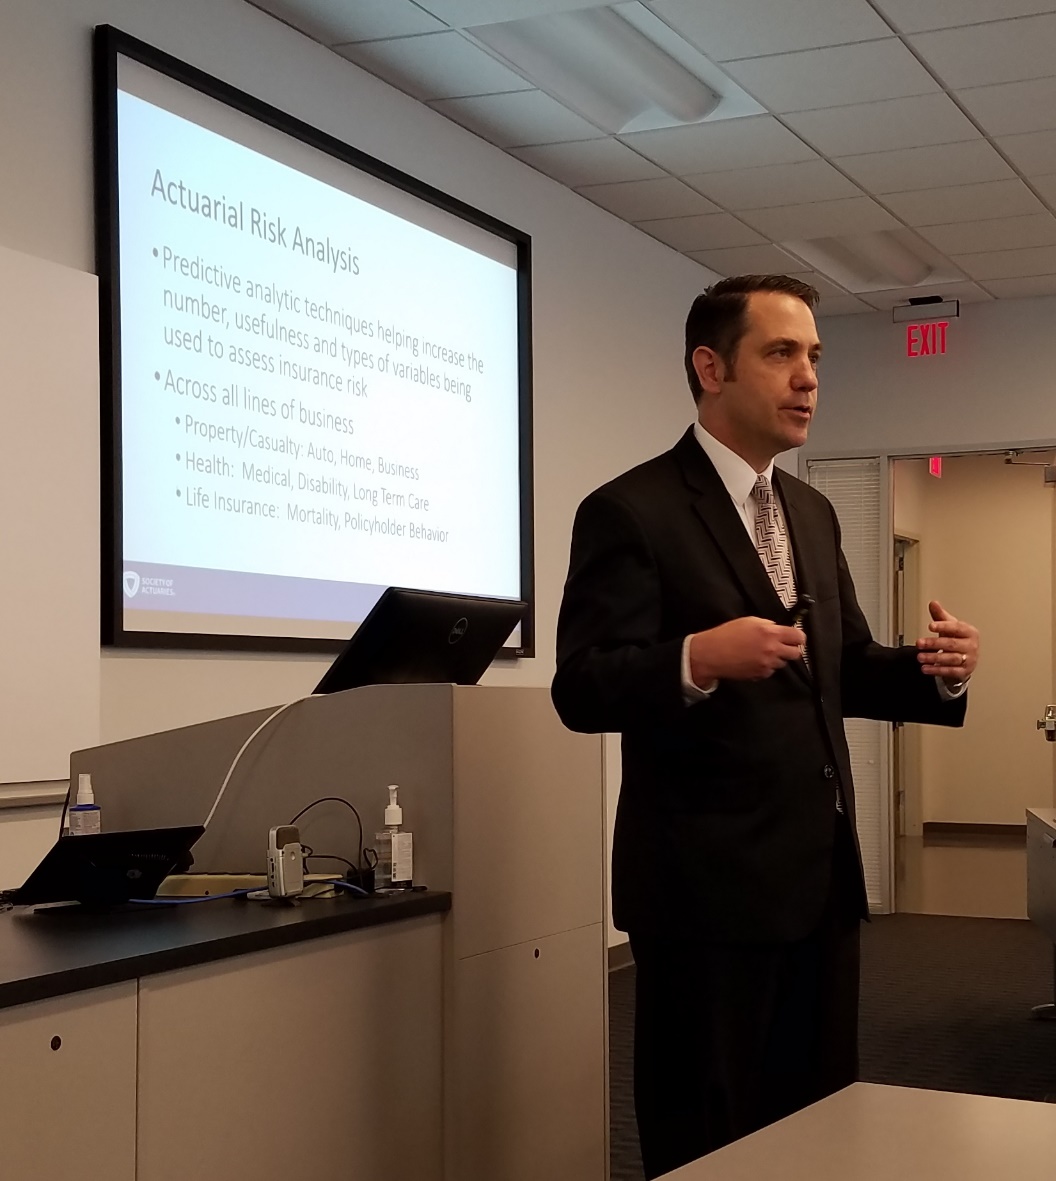 R. Dale Hall from the Society of Actuaries presents actuarial risk analysis techniques using predictive analytics.